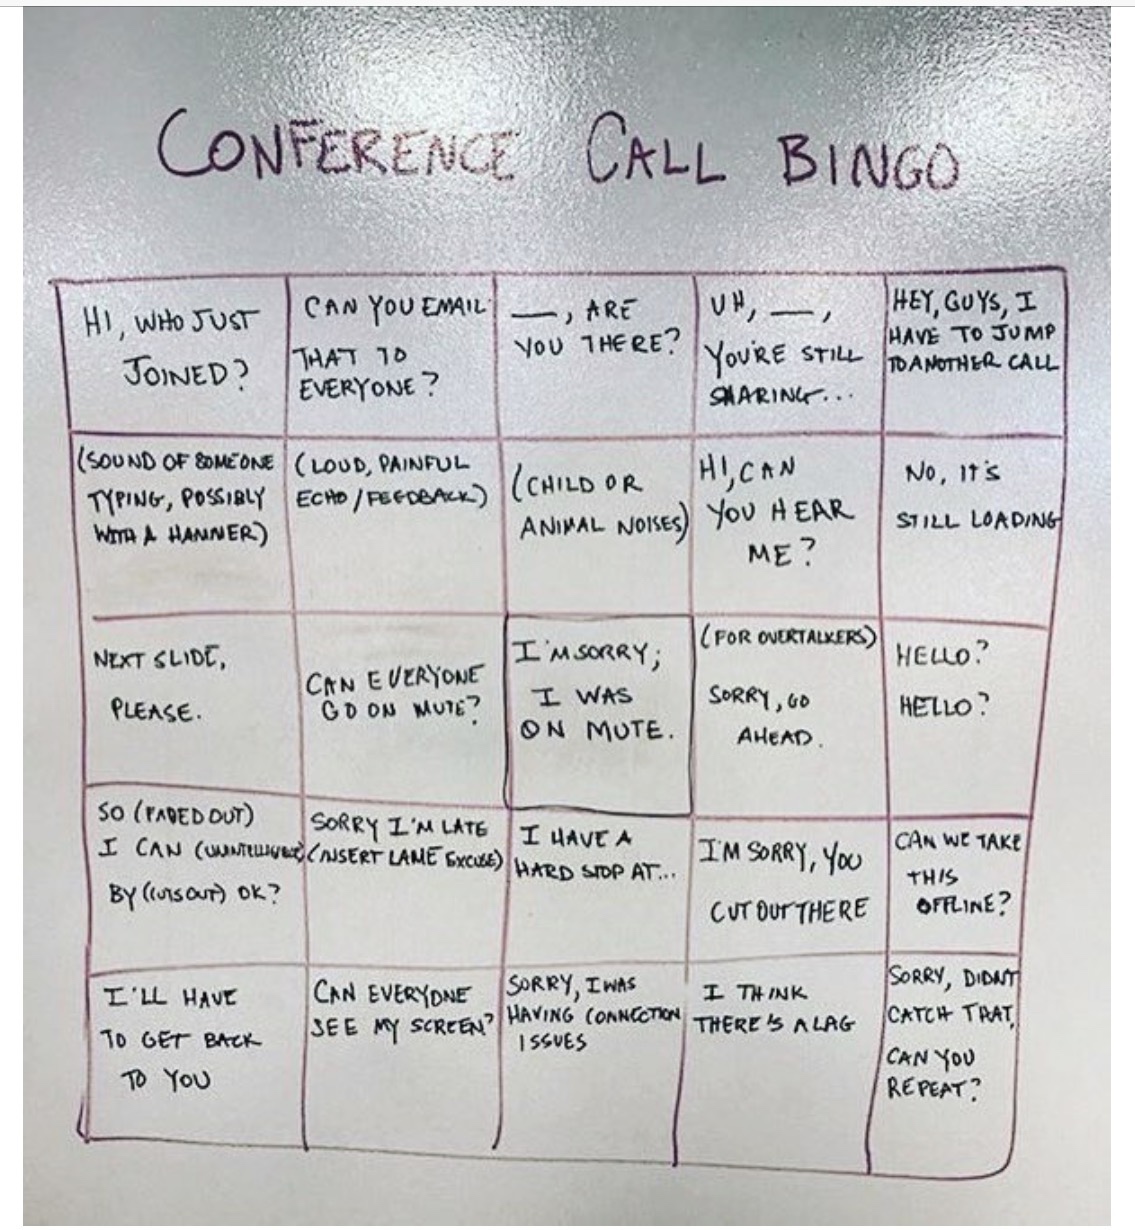 conference call bingo - Conference Call Bingo Hl. Who Just Un __ Can You Email _, Are You There? Everyone? Hey, Guys, I Have To Jump That 70 You'Re Still Joined To Another Call Faring... Hican No, it's Sound Of Someone Loud, Painful Typing, Possibly Echop